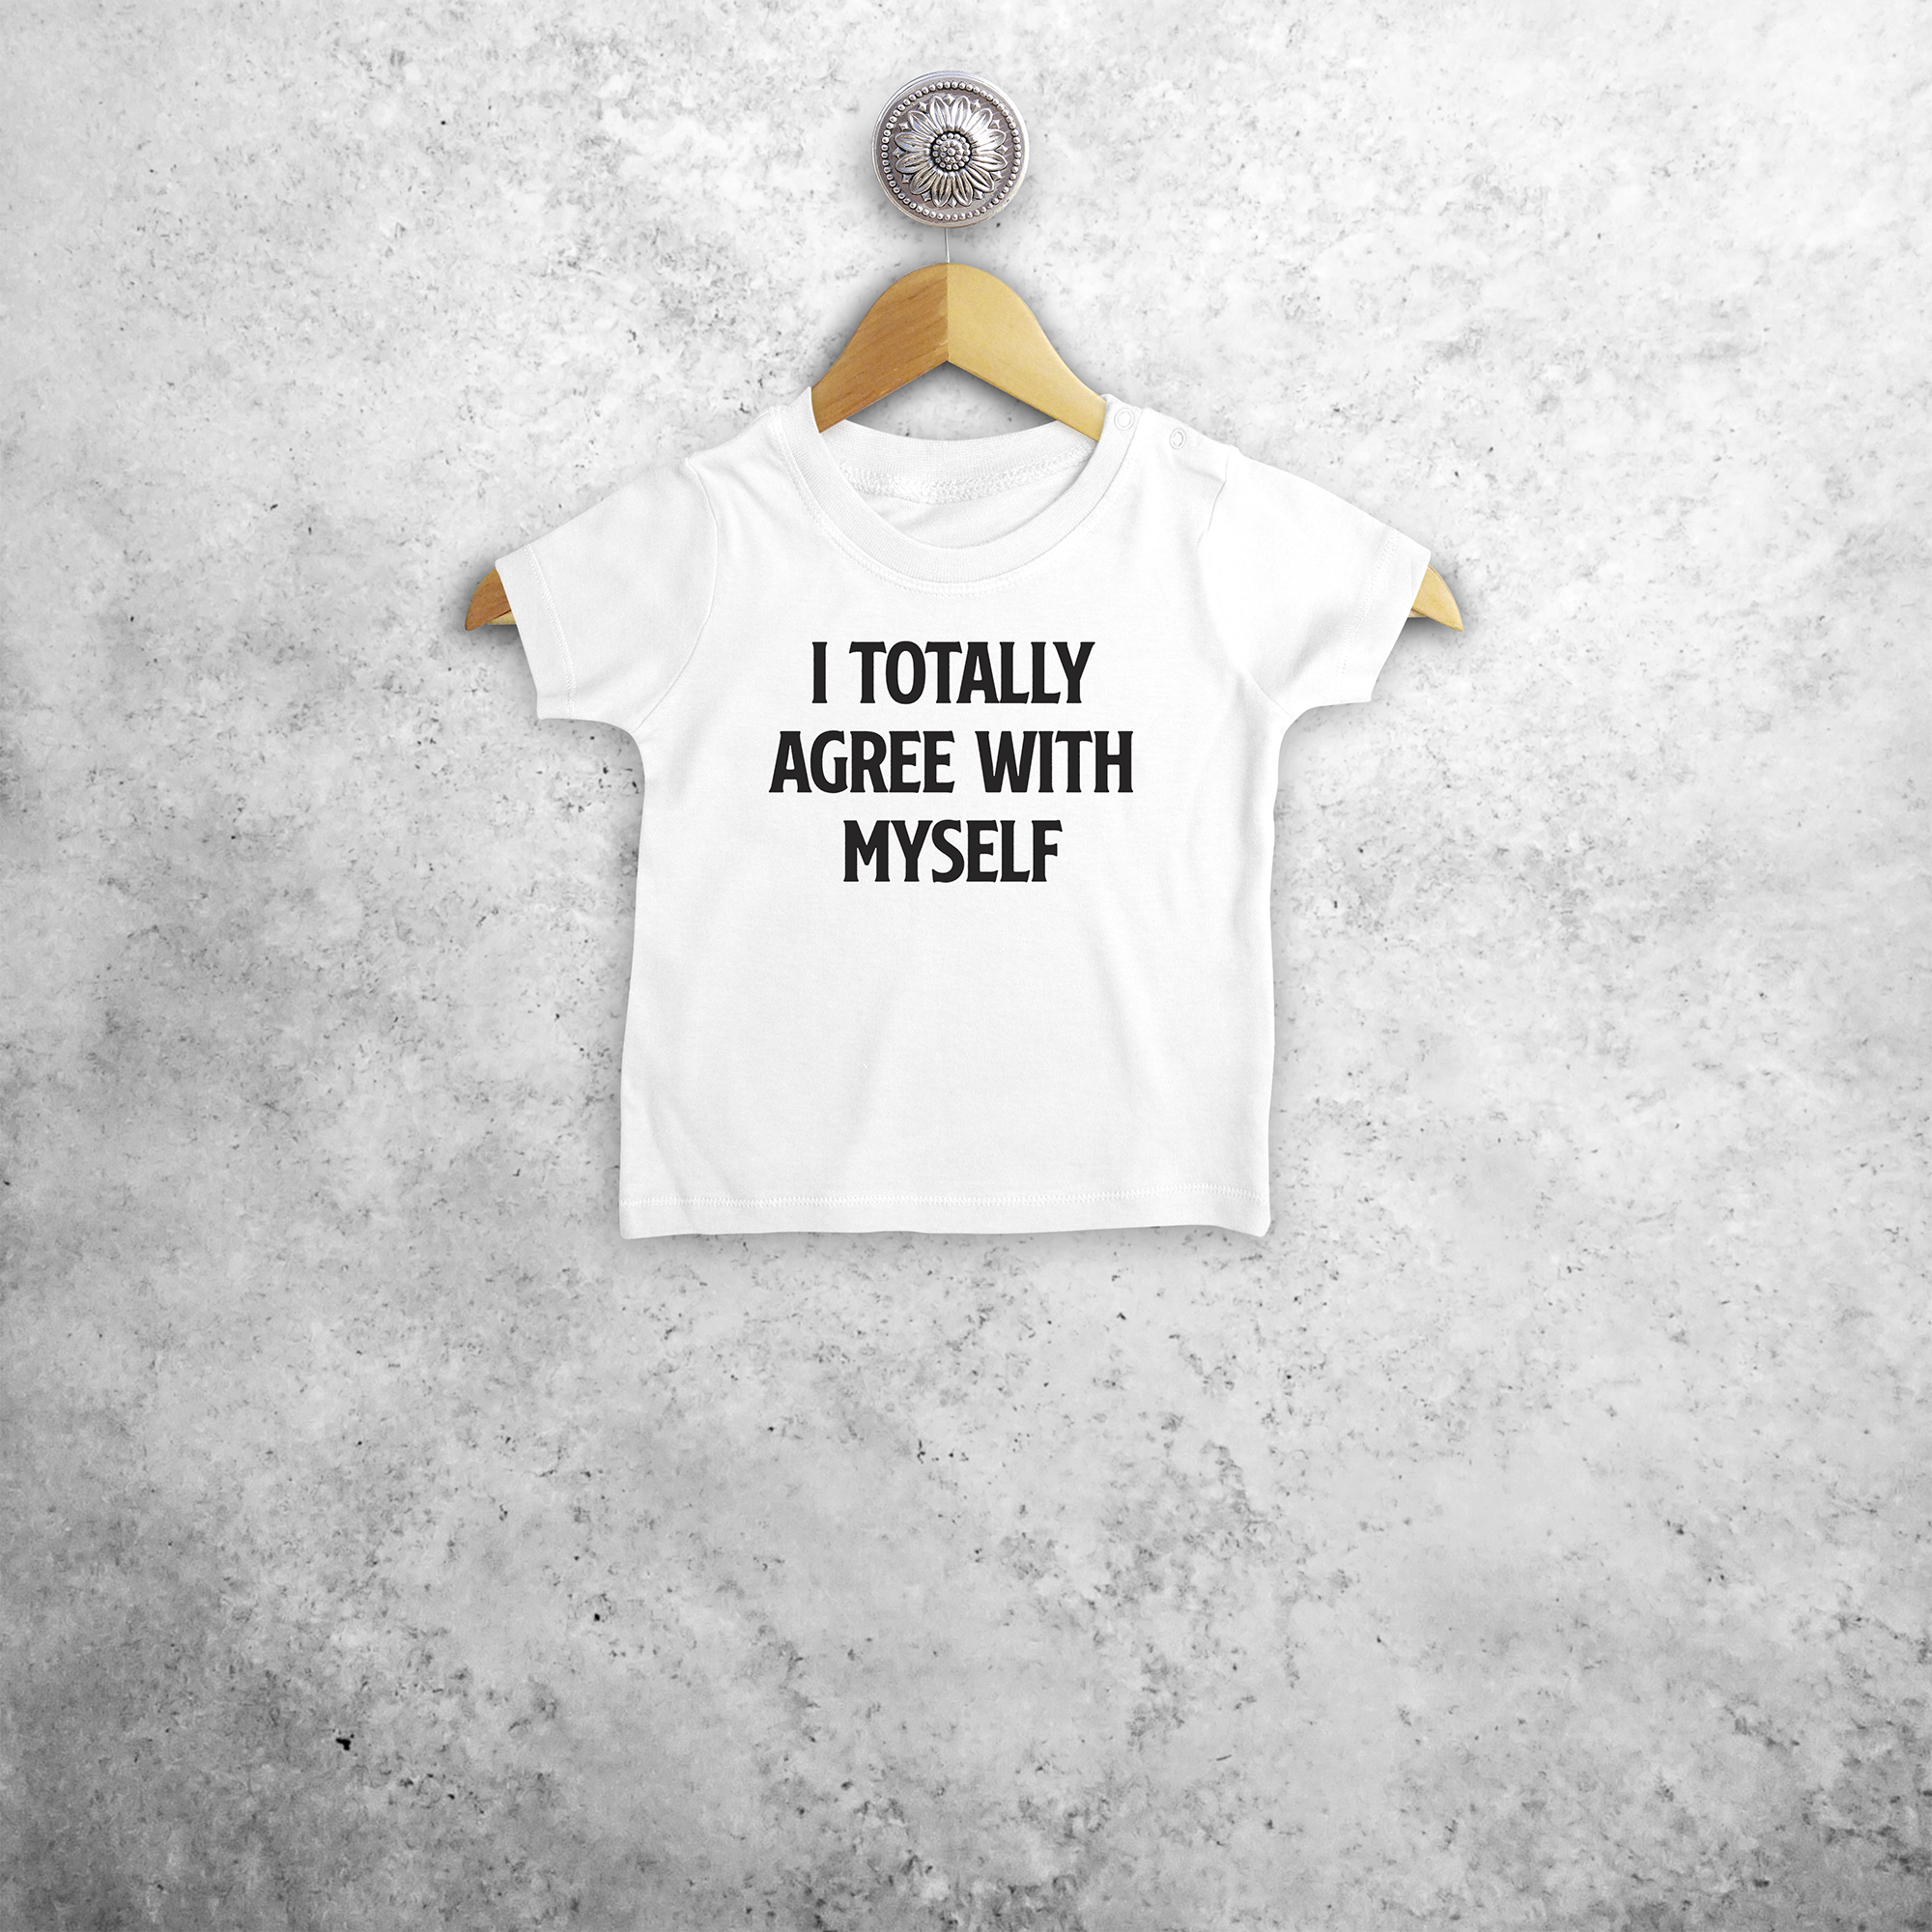 'I totally agree with myself' baby shortsleeve shirt